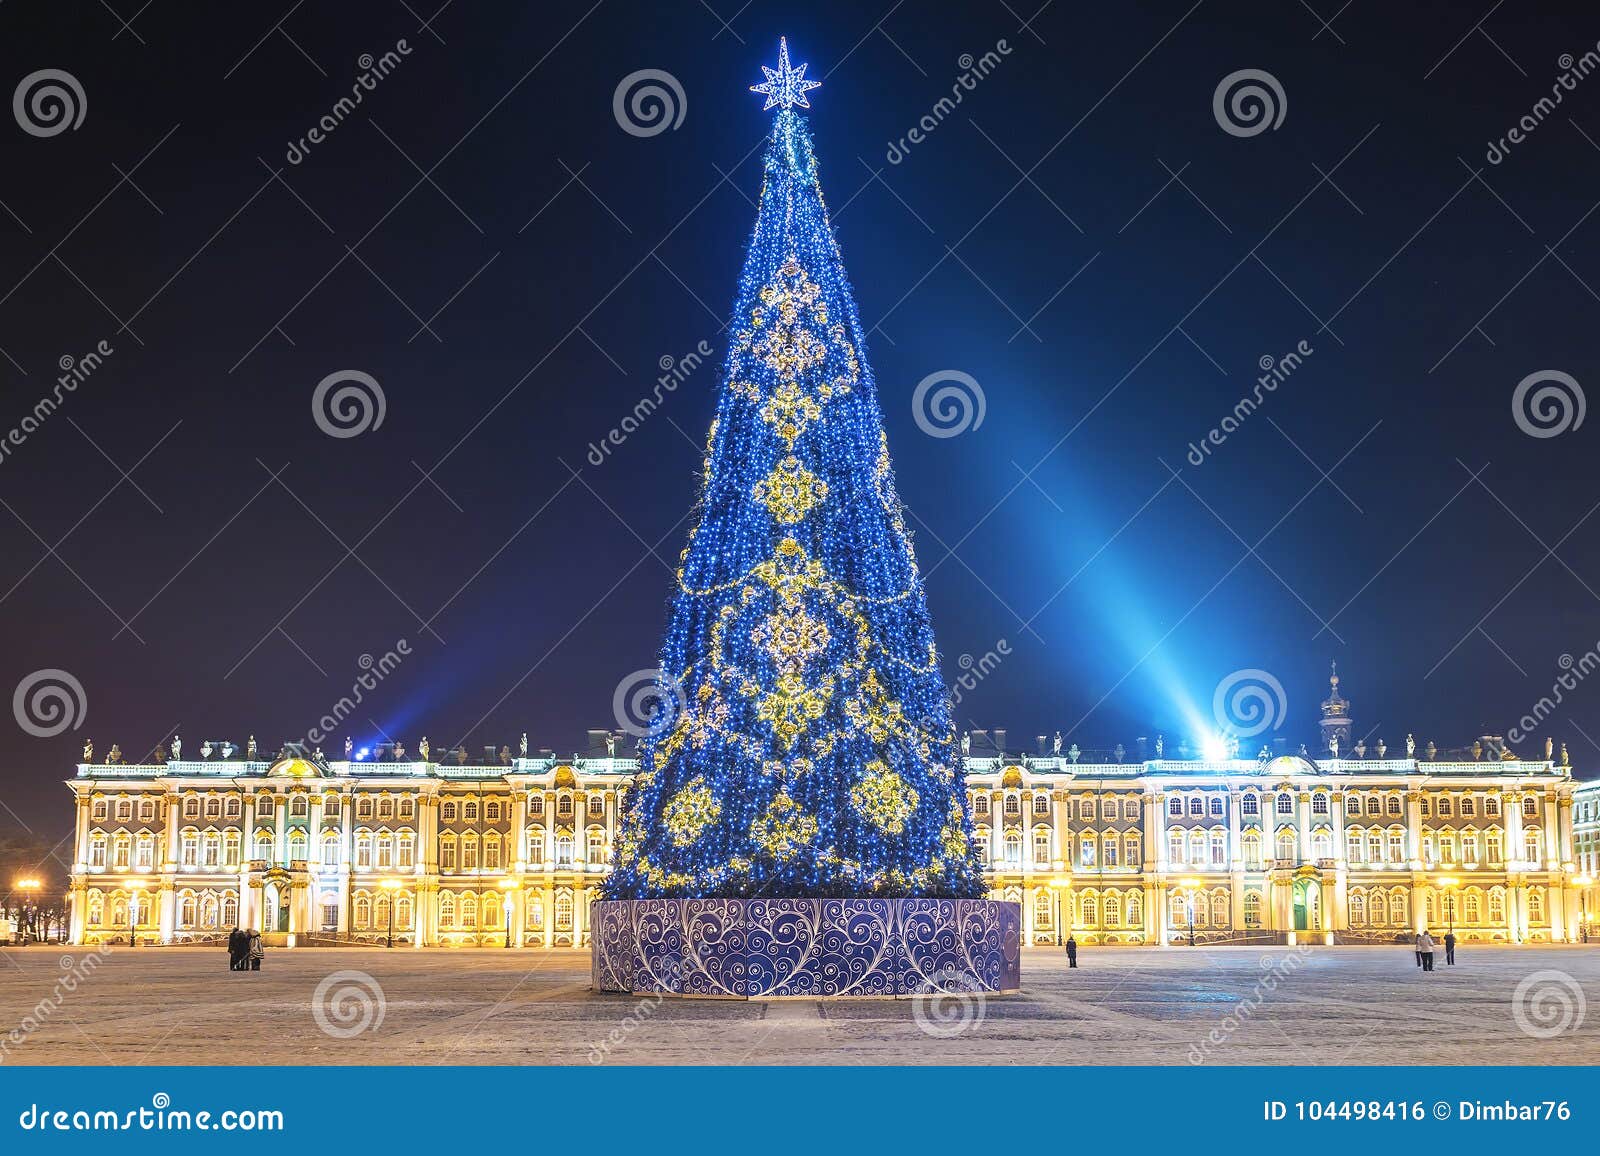 Download Christmas In St Petersburg Saint Isaac s Cathedral Stock Image